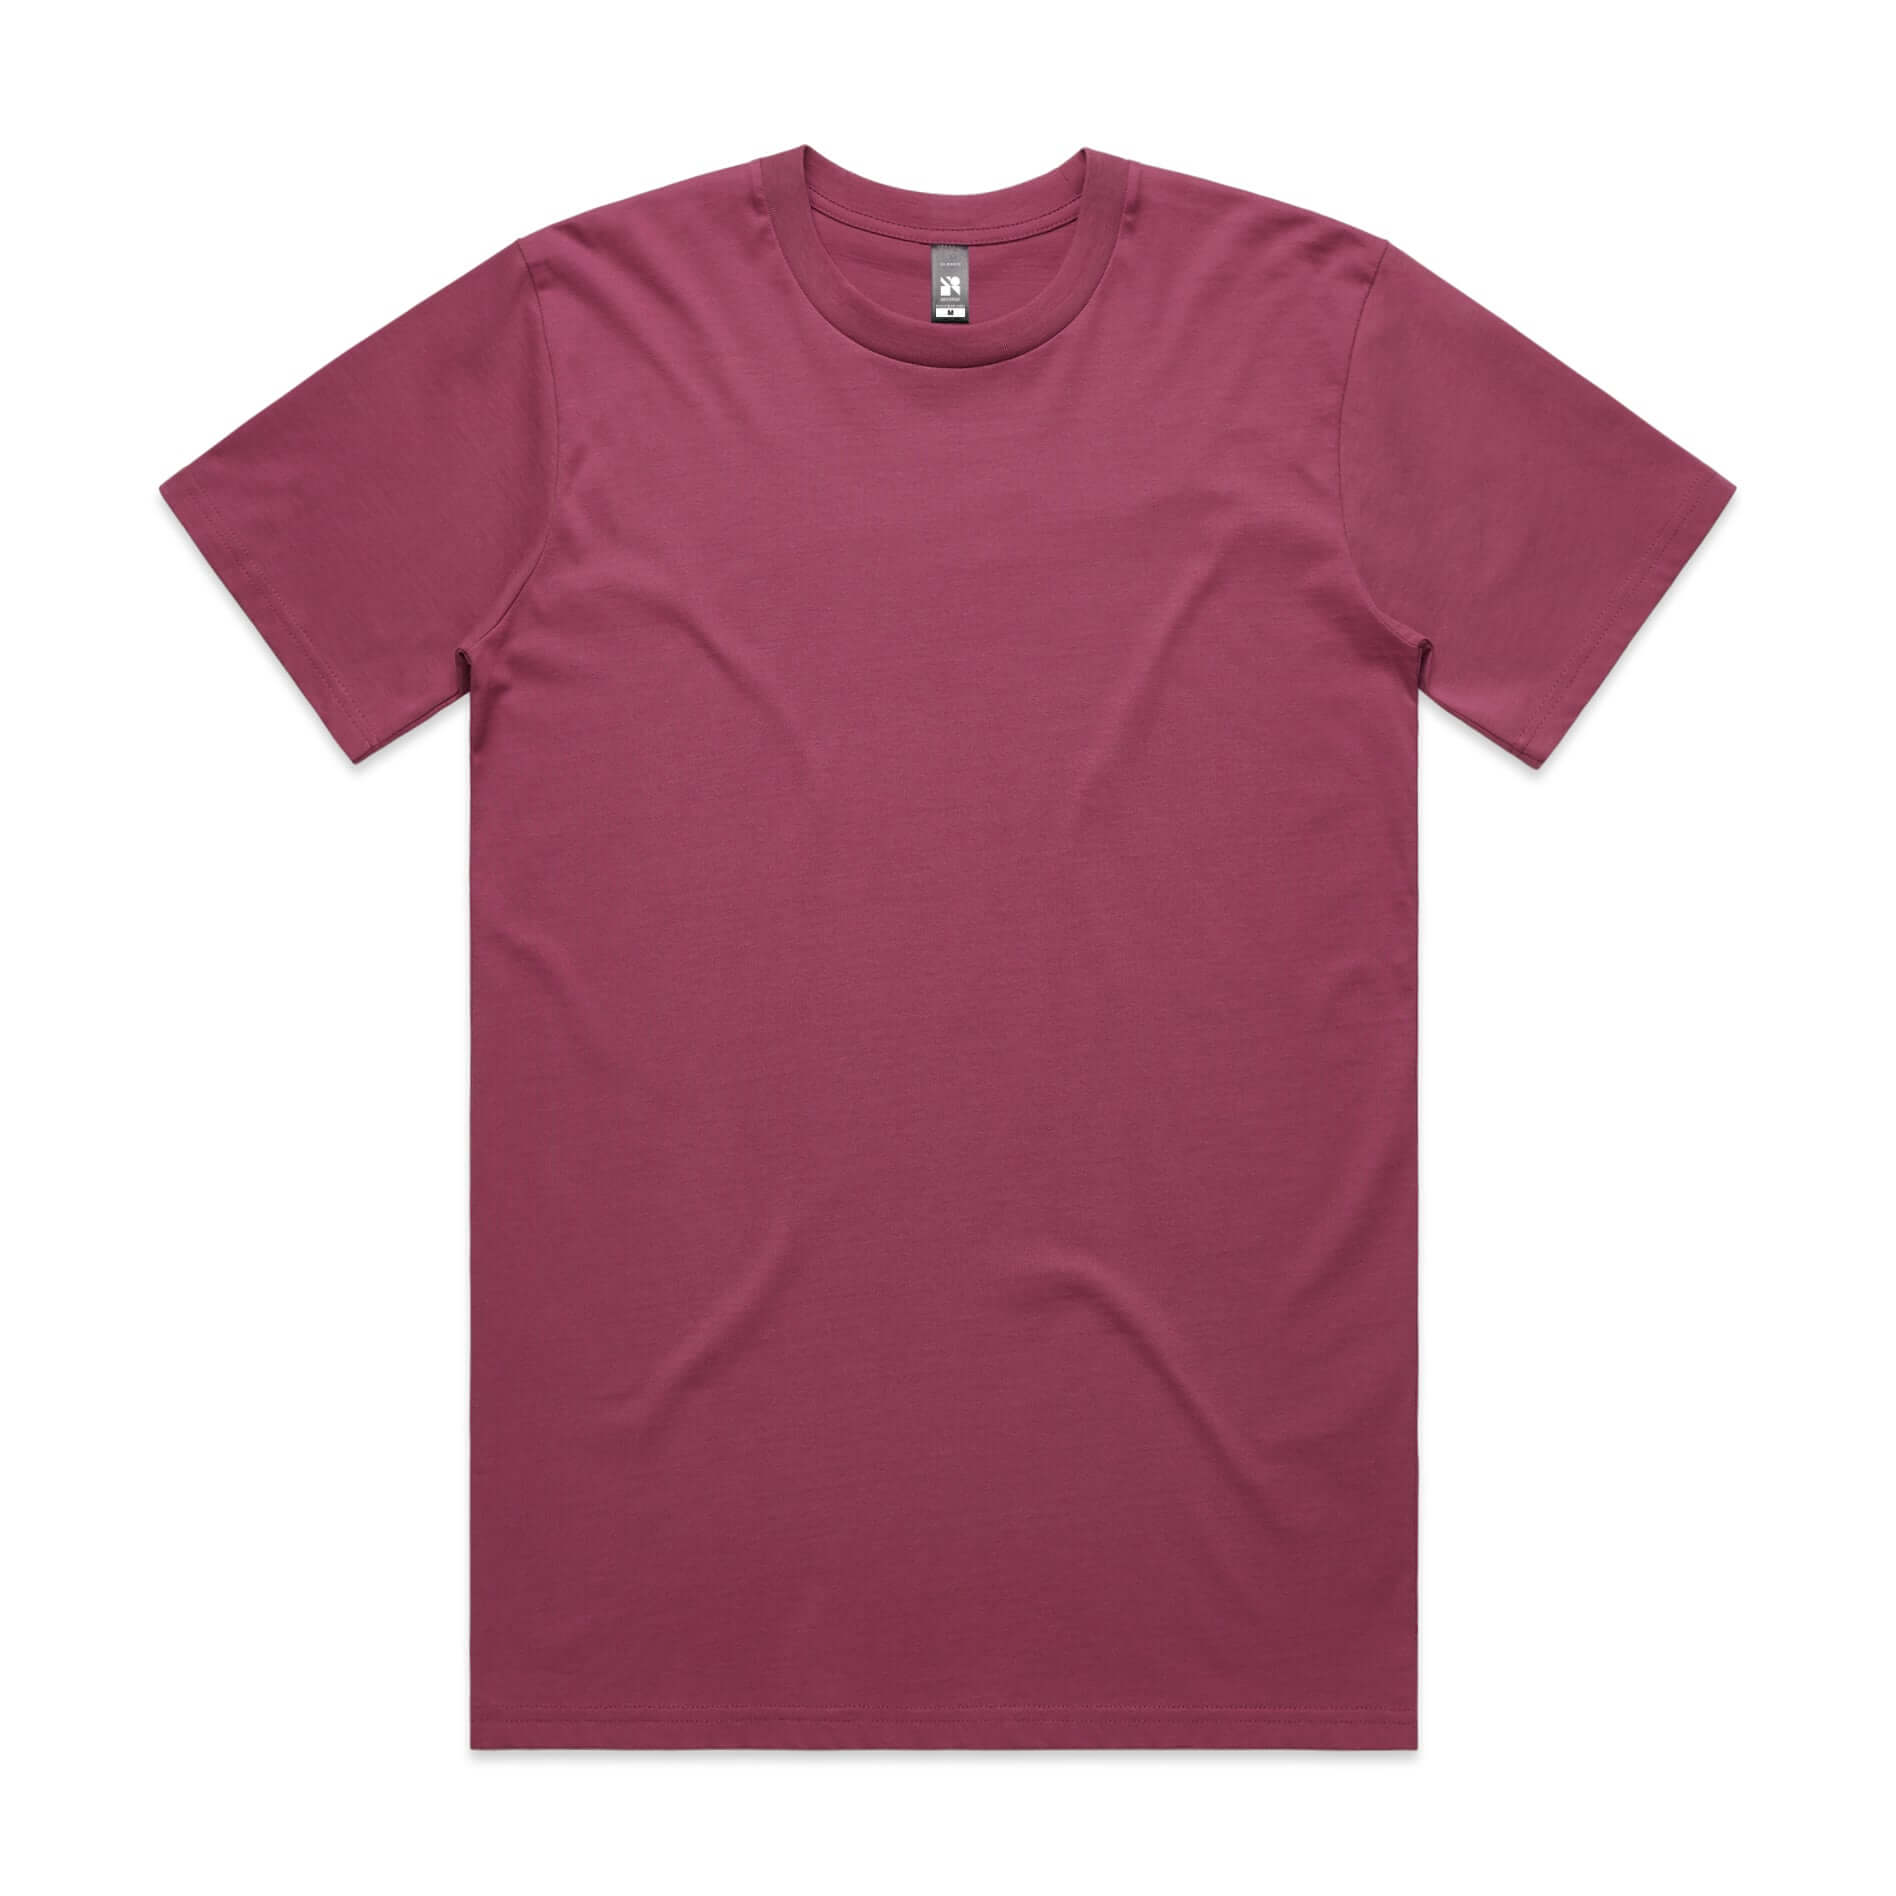 AS Colour CLASSIC TEE - Berry